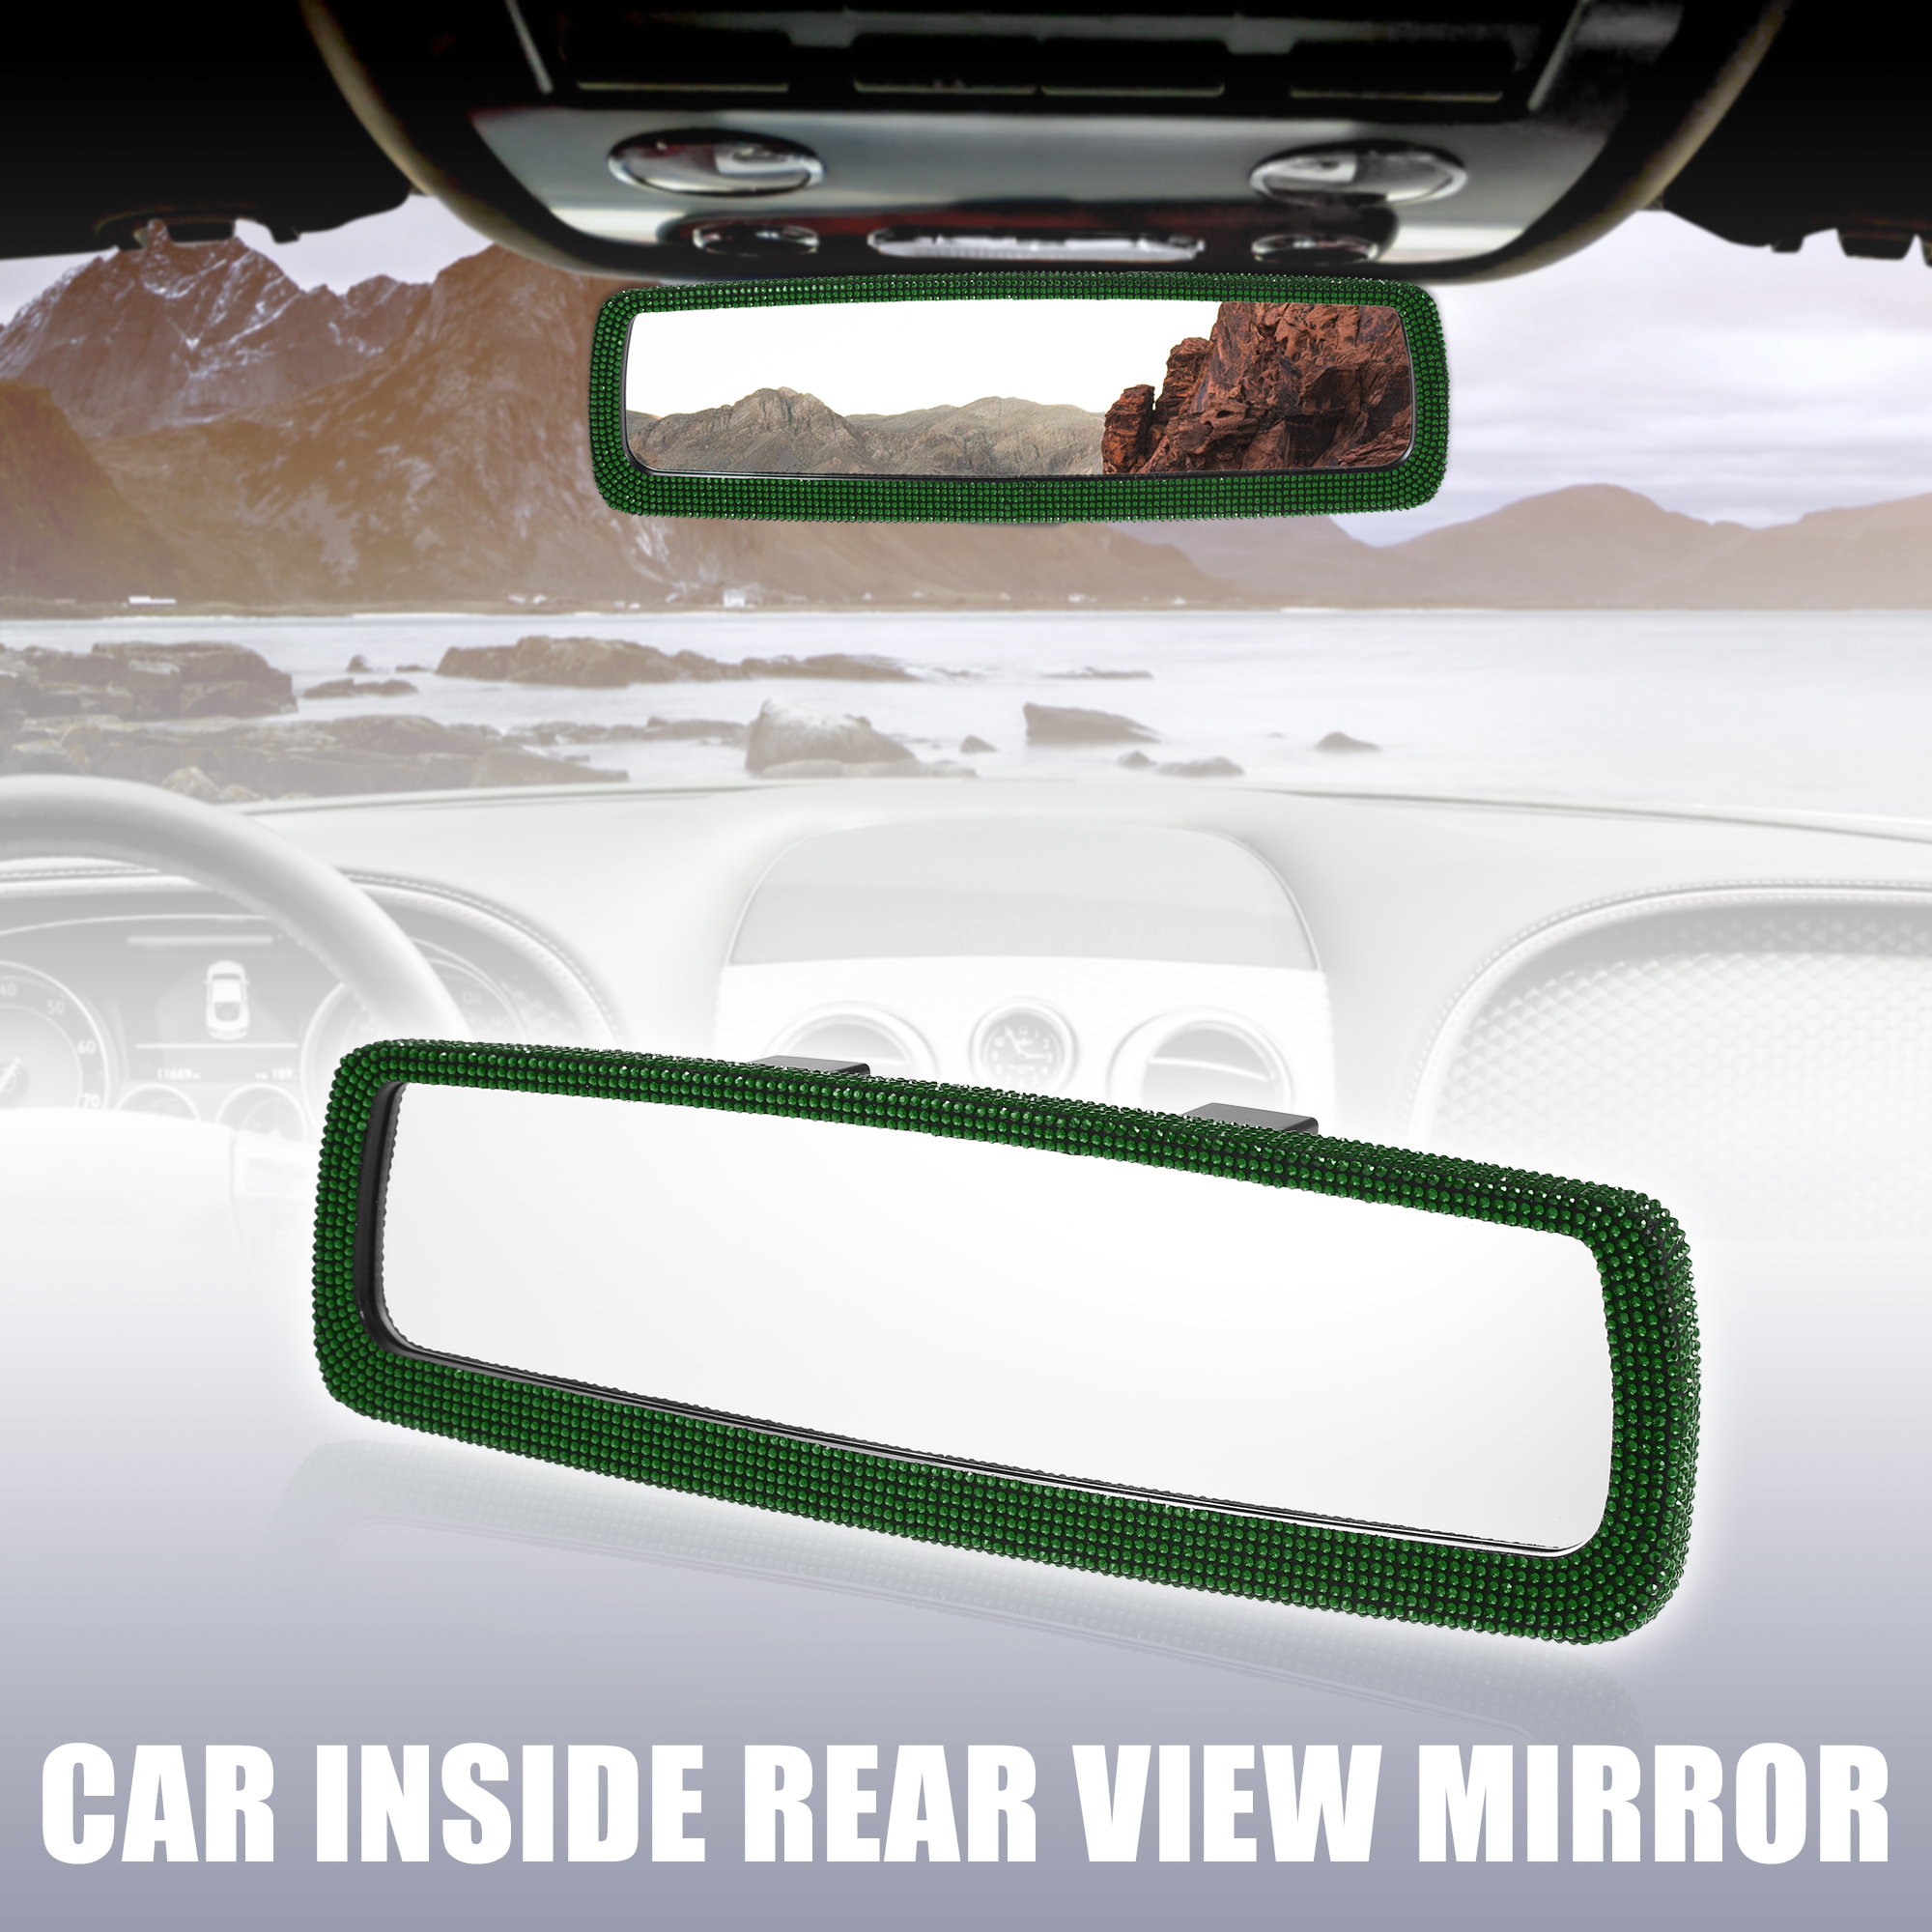 Unique Bargains Bling Car Rear View Mirror with Faux Crystal Rhinestone Interior for Women Green